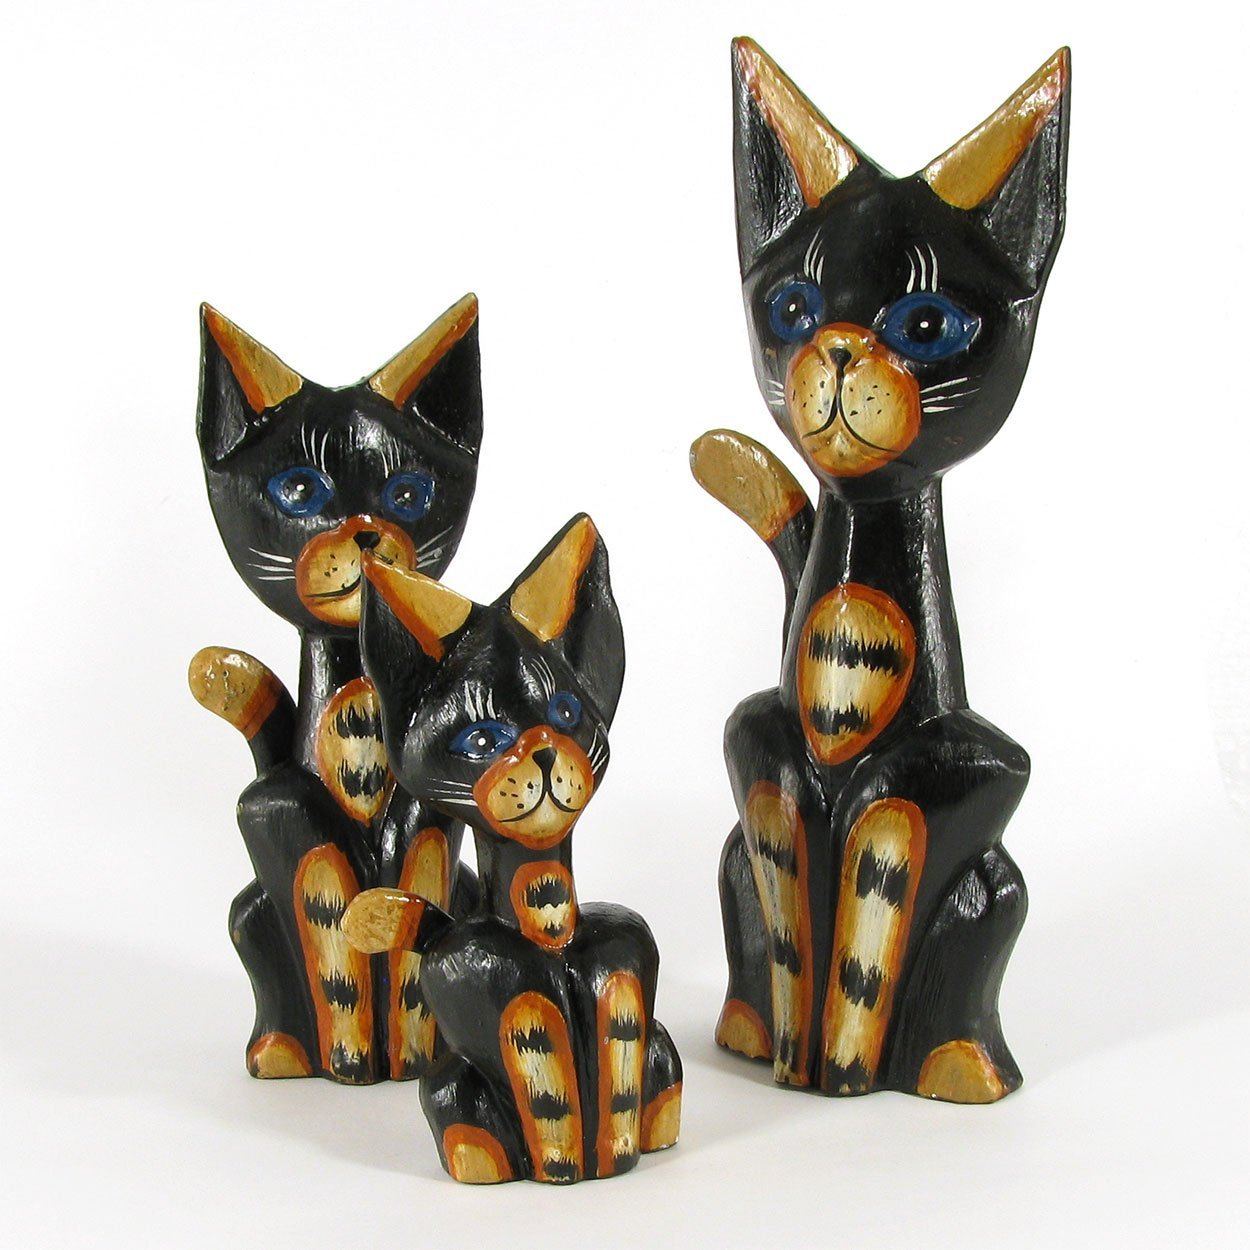 140044 - Set of Three 6-10in Wooden Cats - Black and Gold